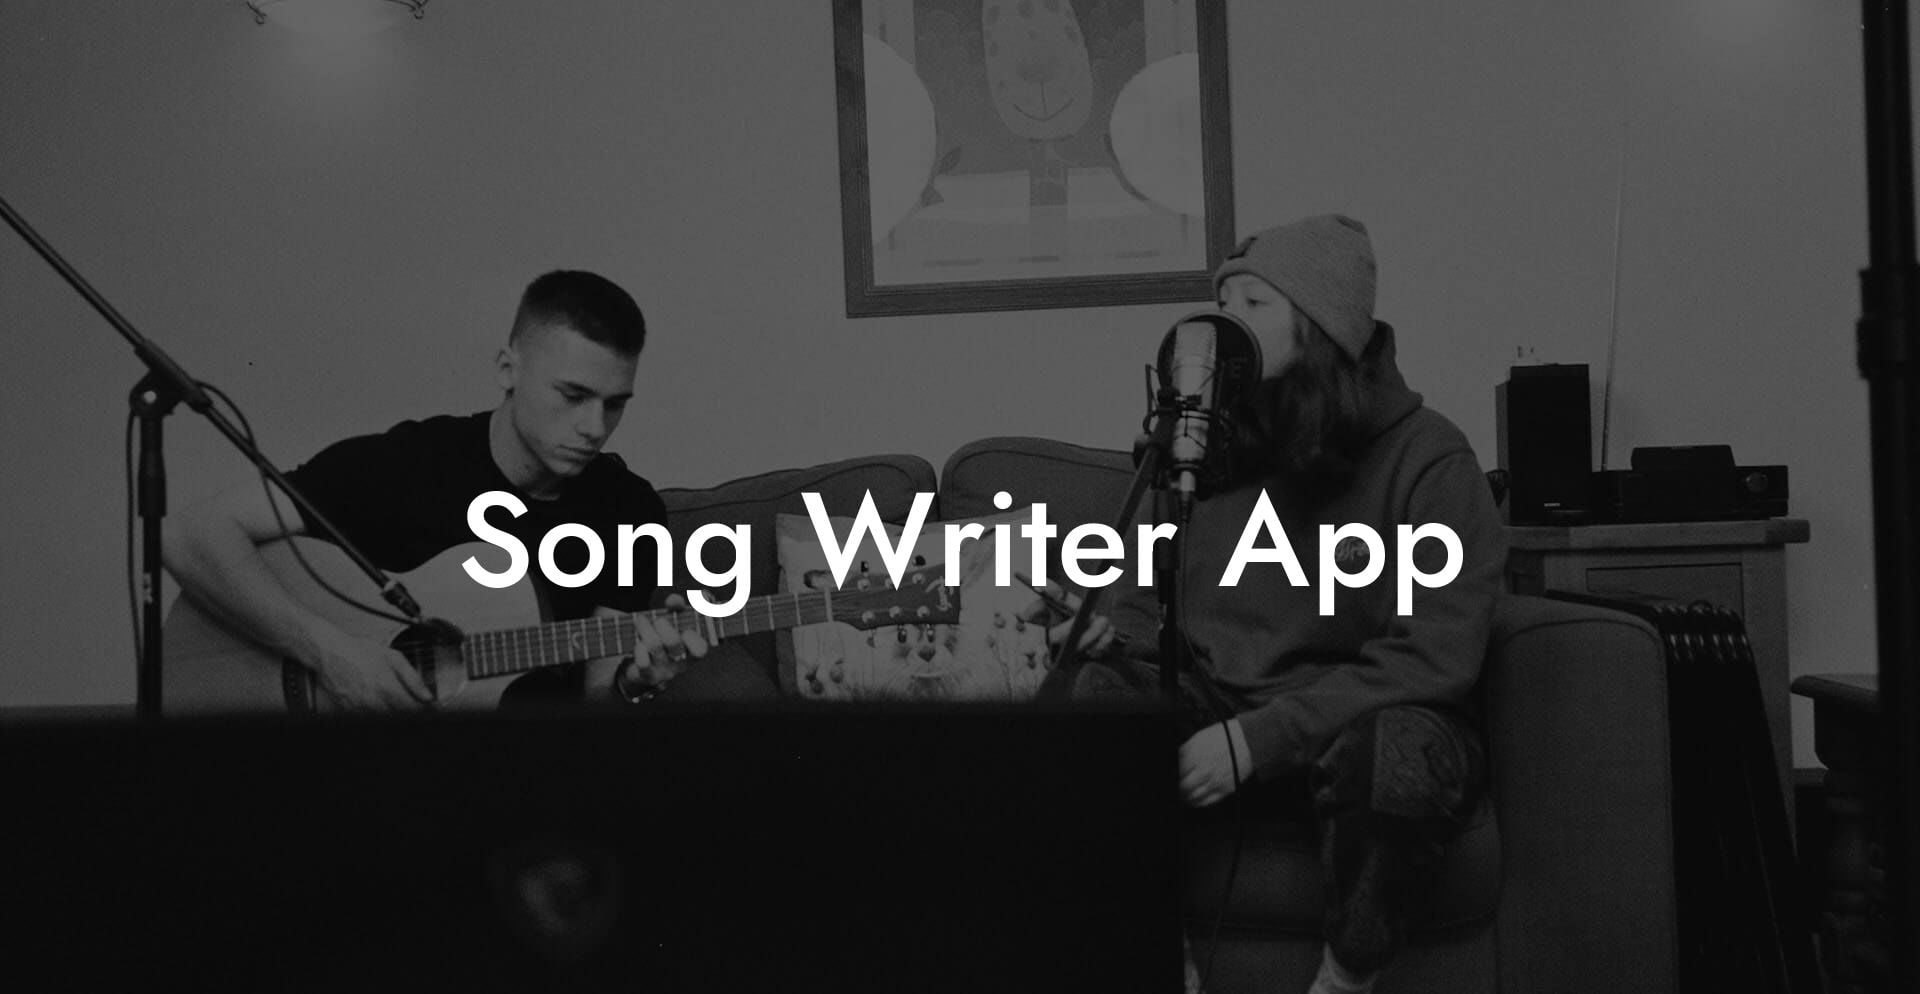 song writer app lyric assistant